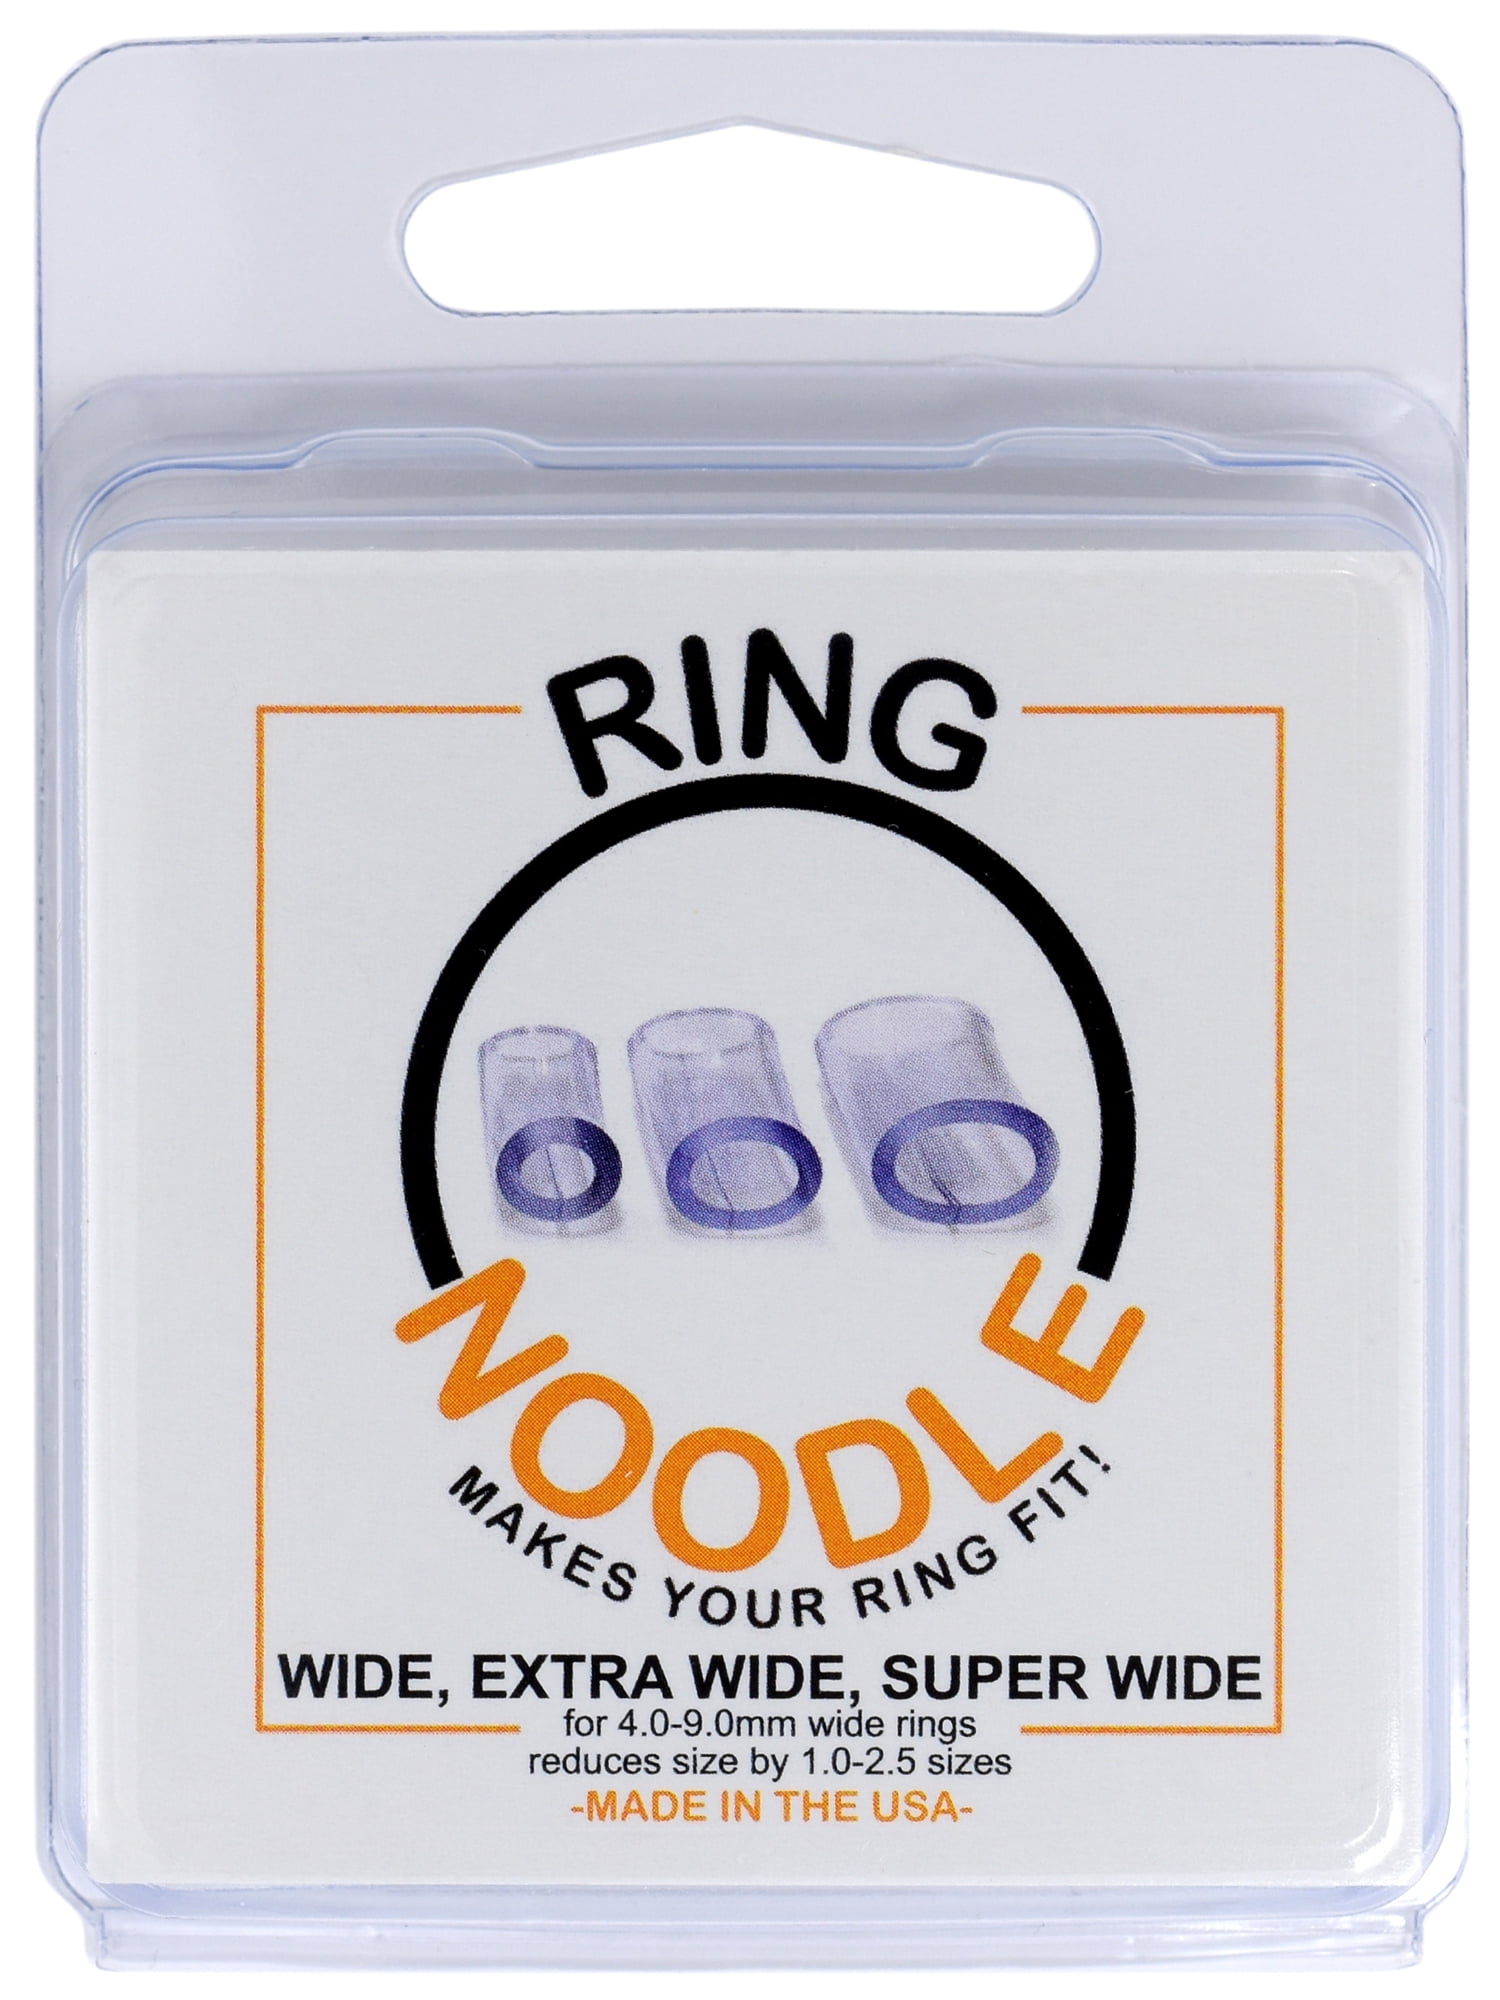 Finger Fits - Plastic Ring Guards by Manhattan Wardrobe Supply